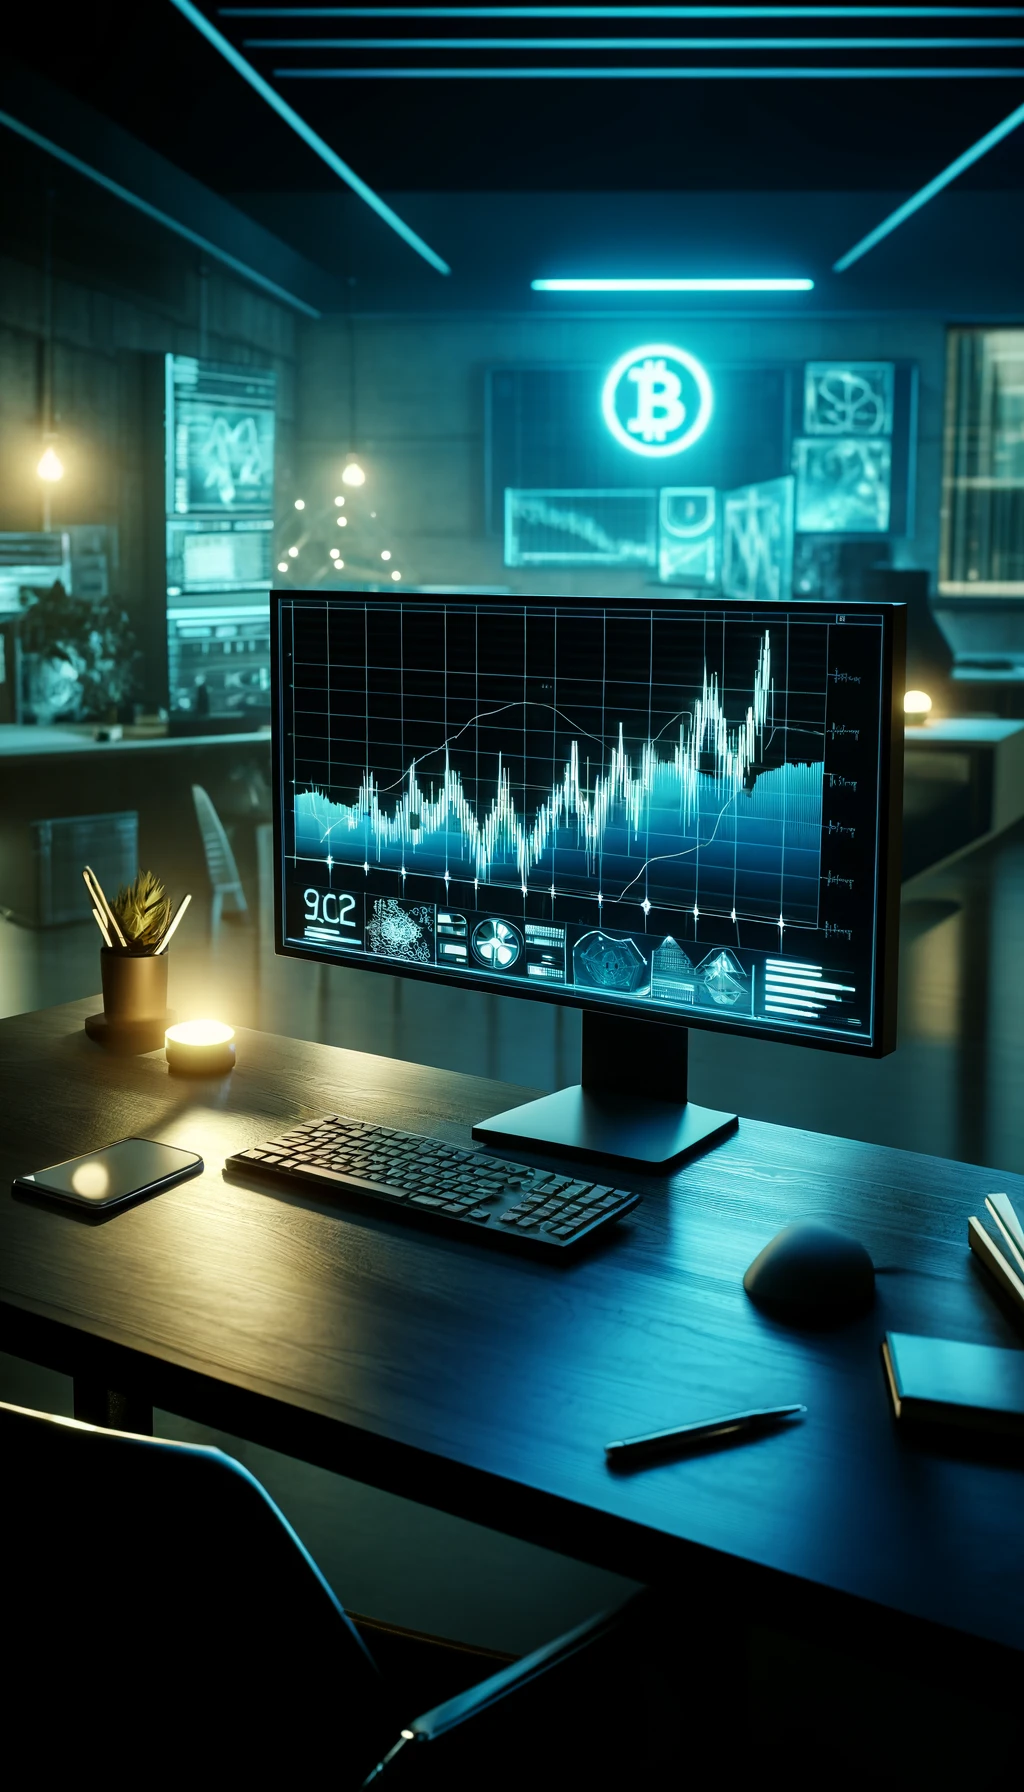 DALL·E 2024-04-12 00.33.41 - A vertical image of a professional workspace focused on crypto trading. The scene includes a monitor displaying a dynamic finance chart with cryptocur